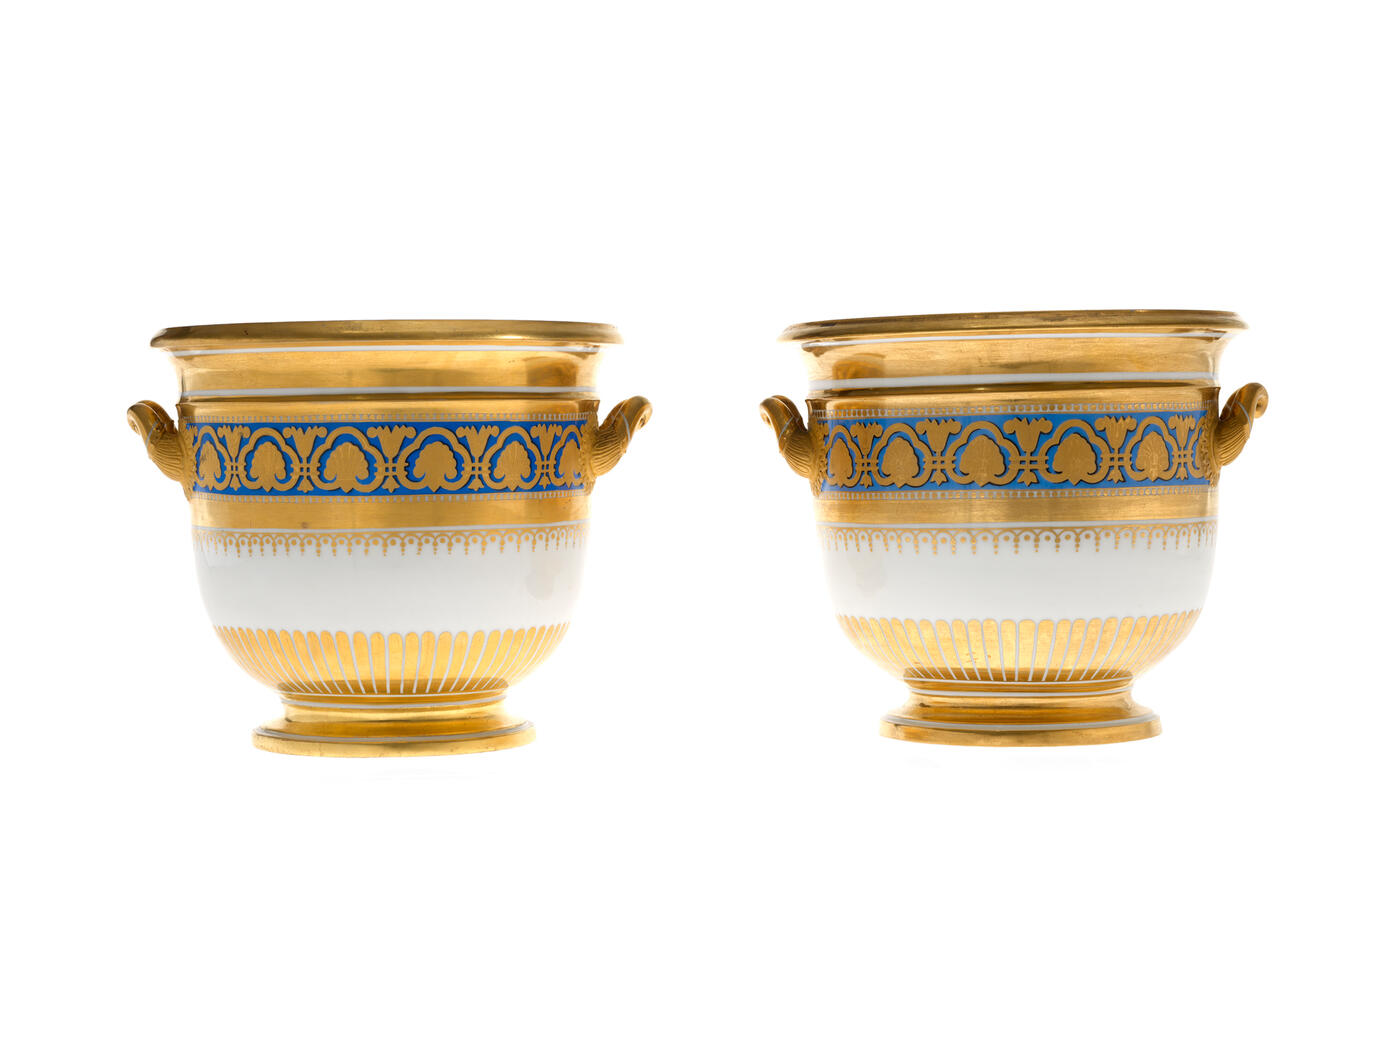 A Pair of Porcelain Wine Coolers from the Ministerial (Ropsha) Service